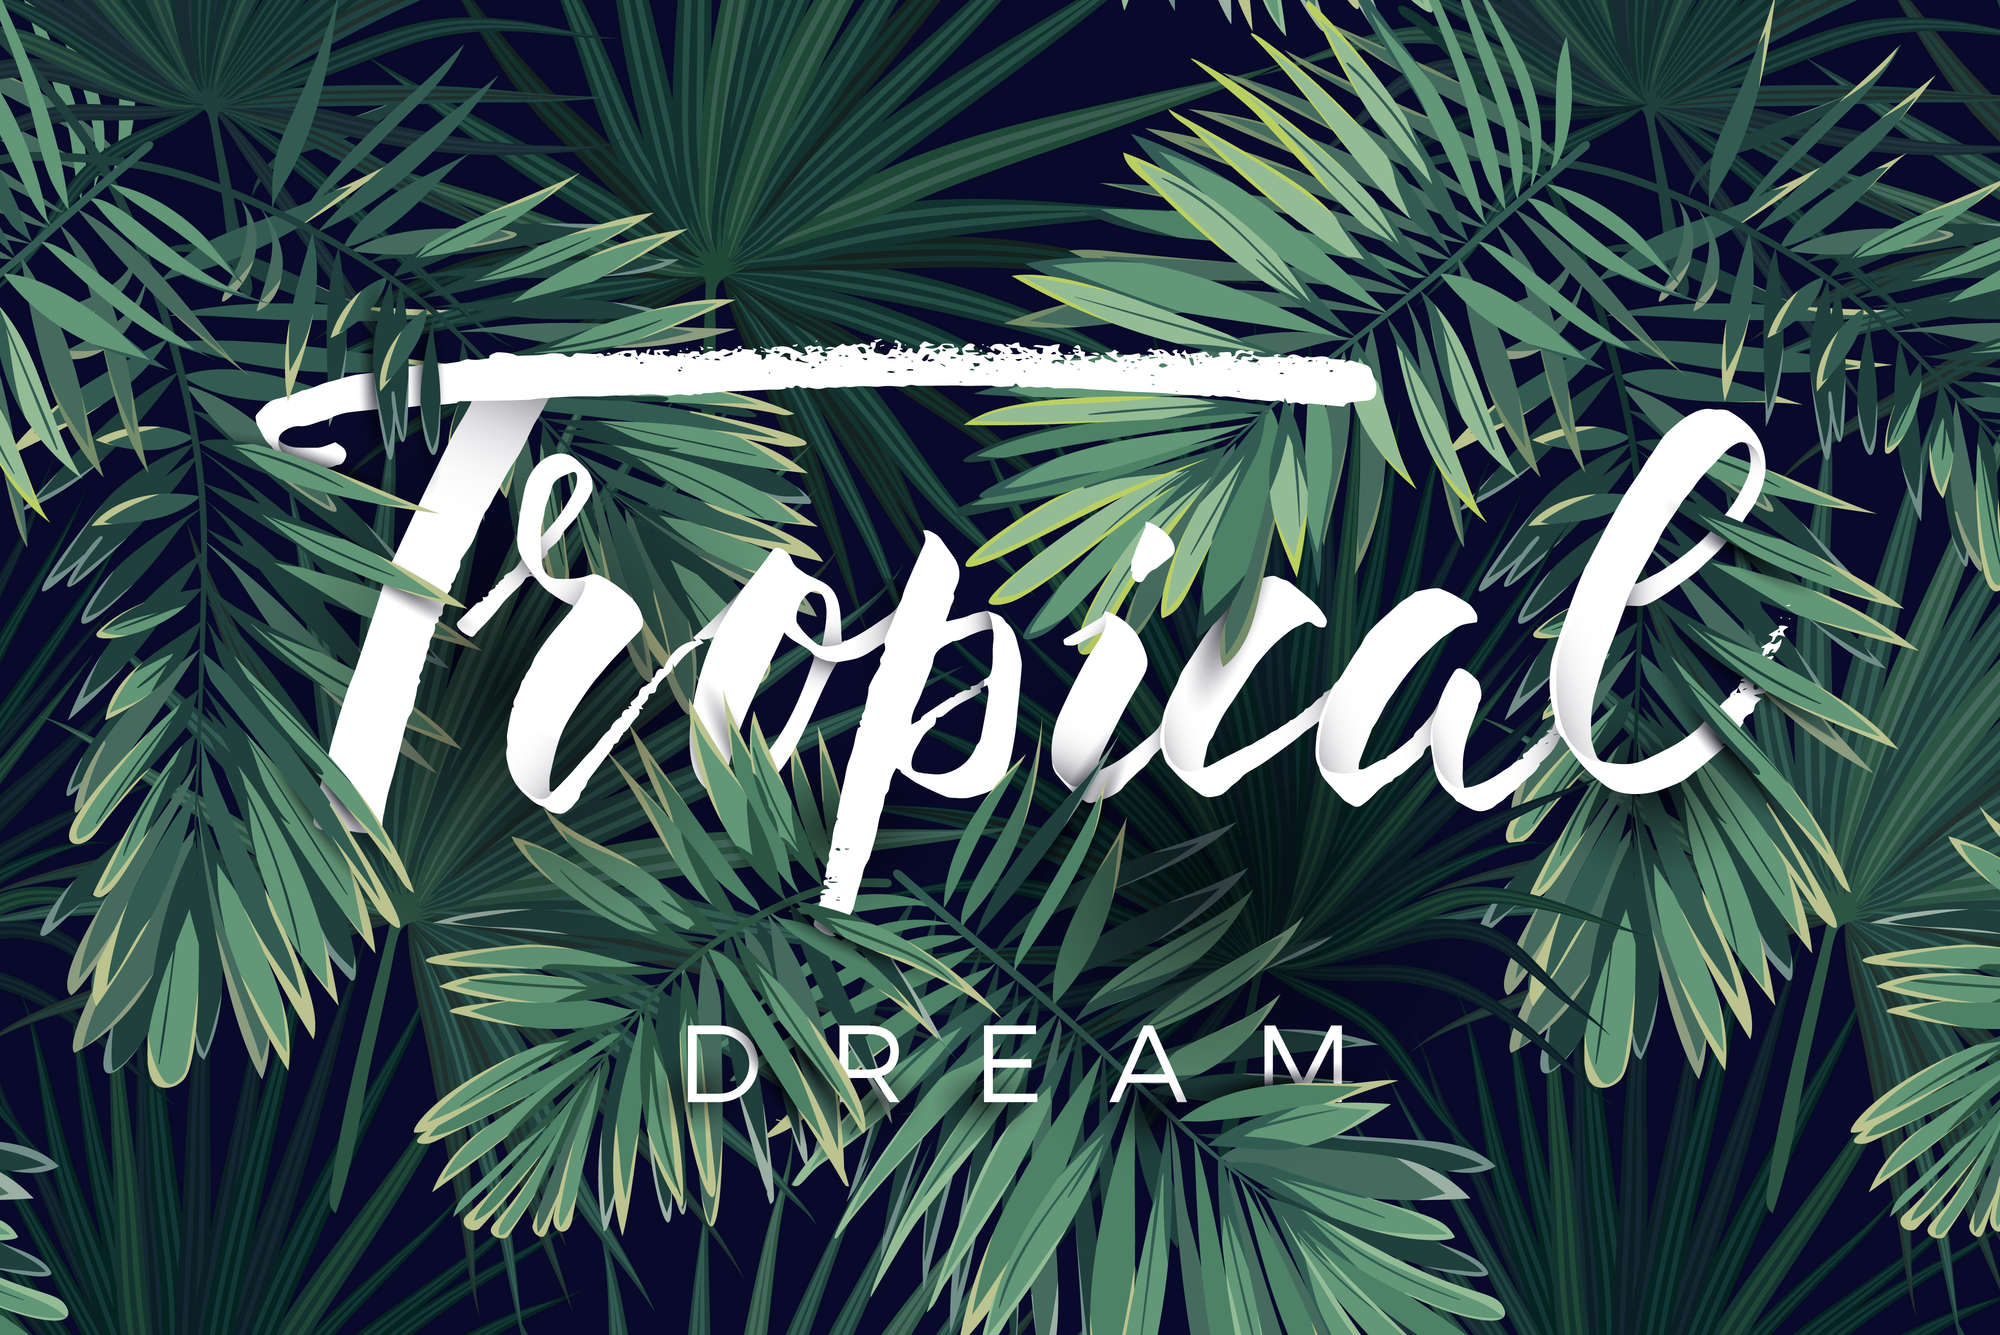             Graphic wall mural "Tropical Dream" lettering on premium smooth non-woven
        